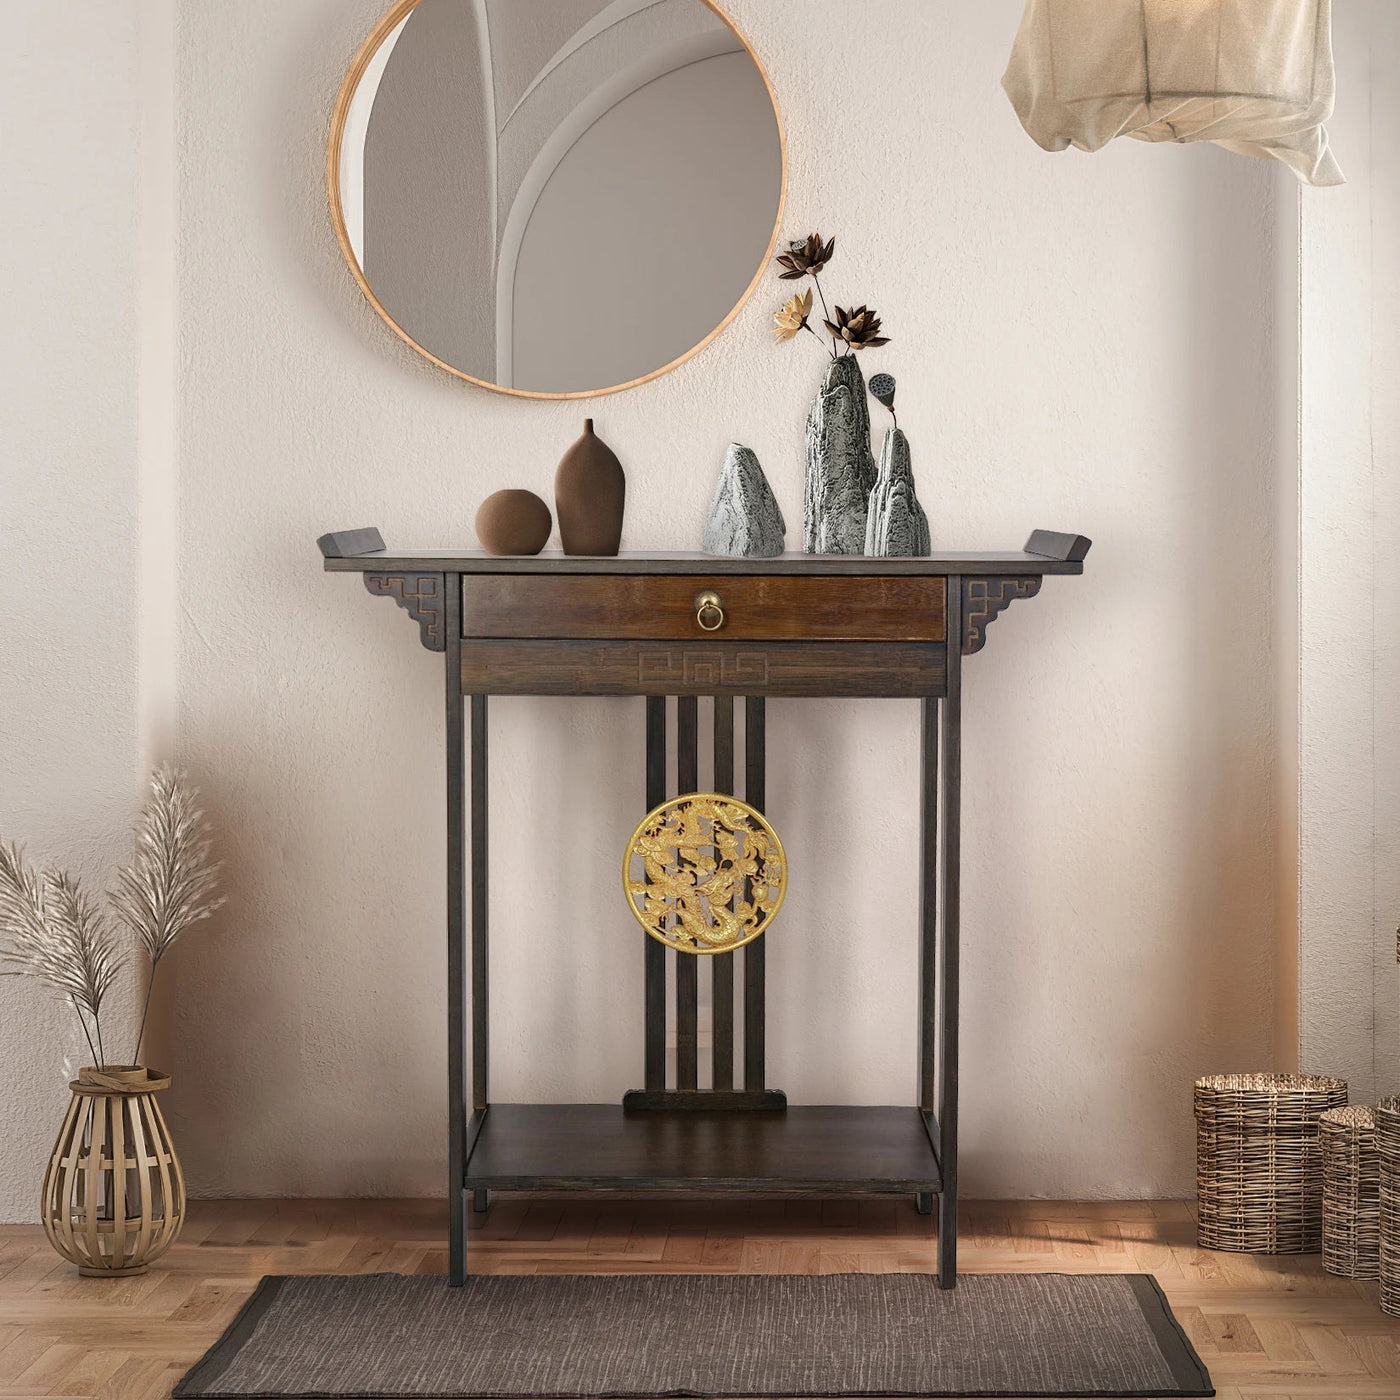 (Copy) Vintage Rustic Console Table Hall Console Table Luxurious Totem Decor with Pull Drawer & Shelf Living Room Furniture